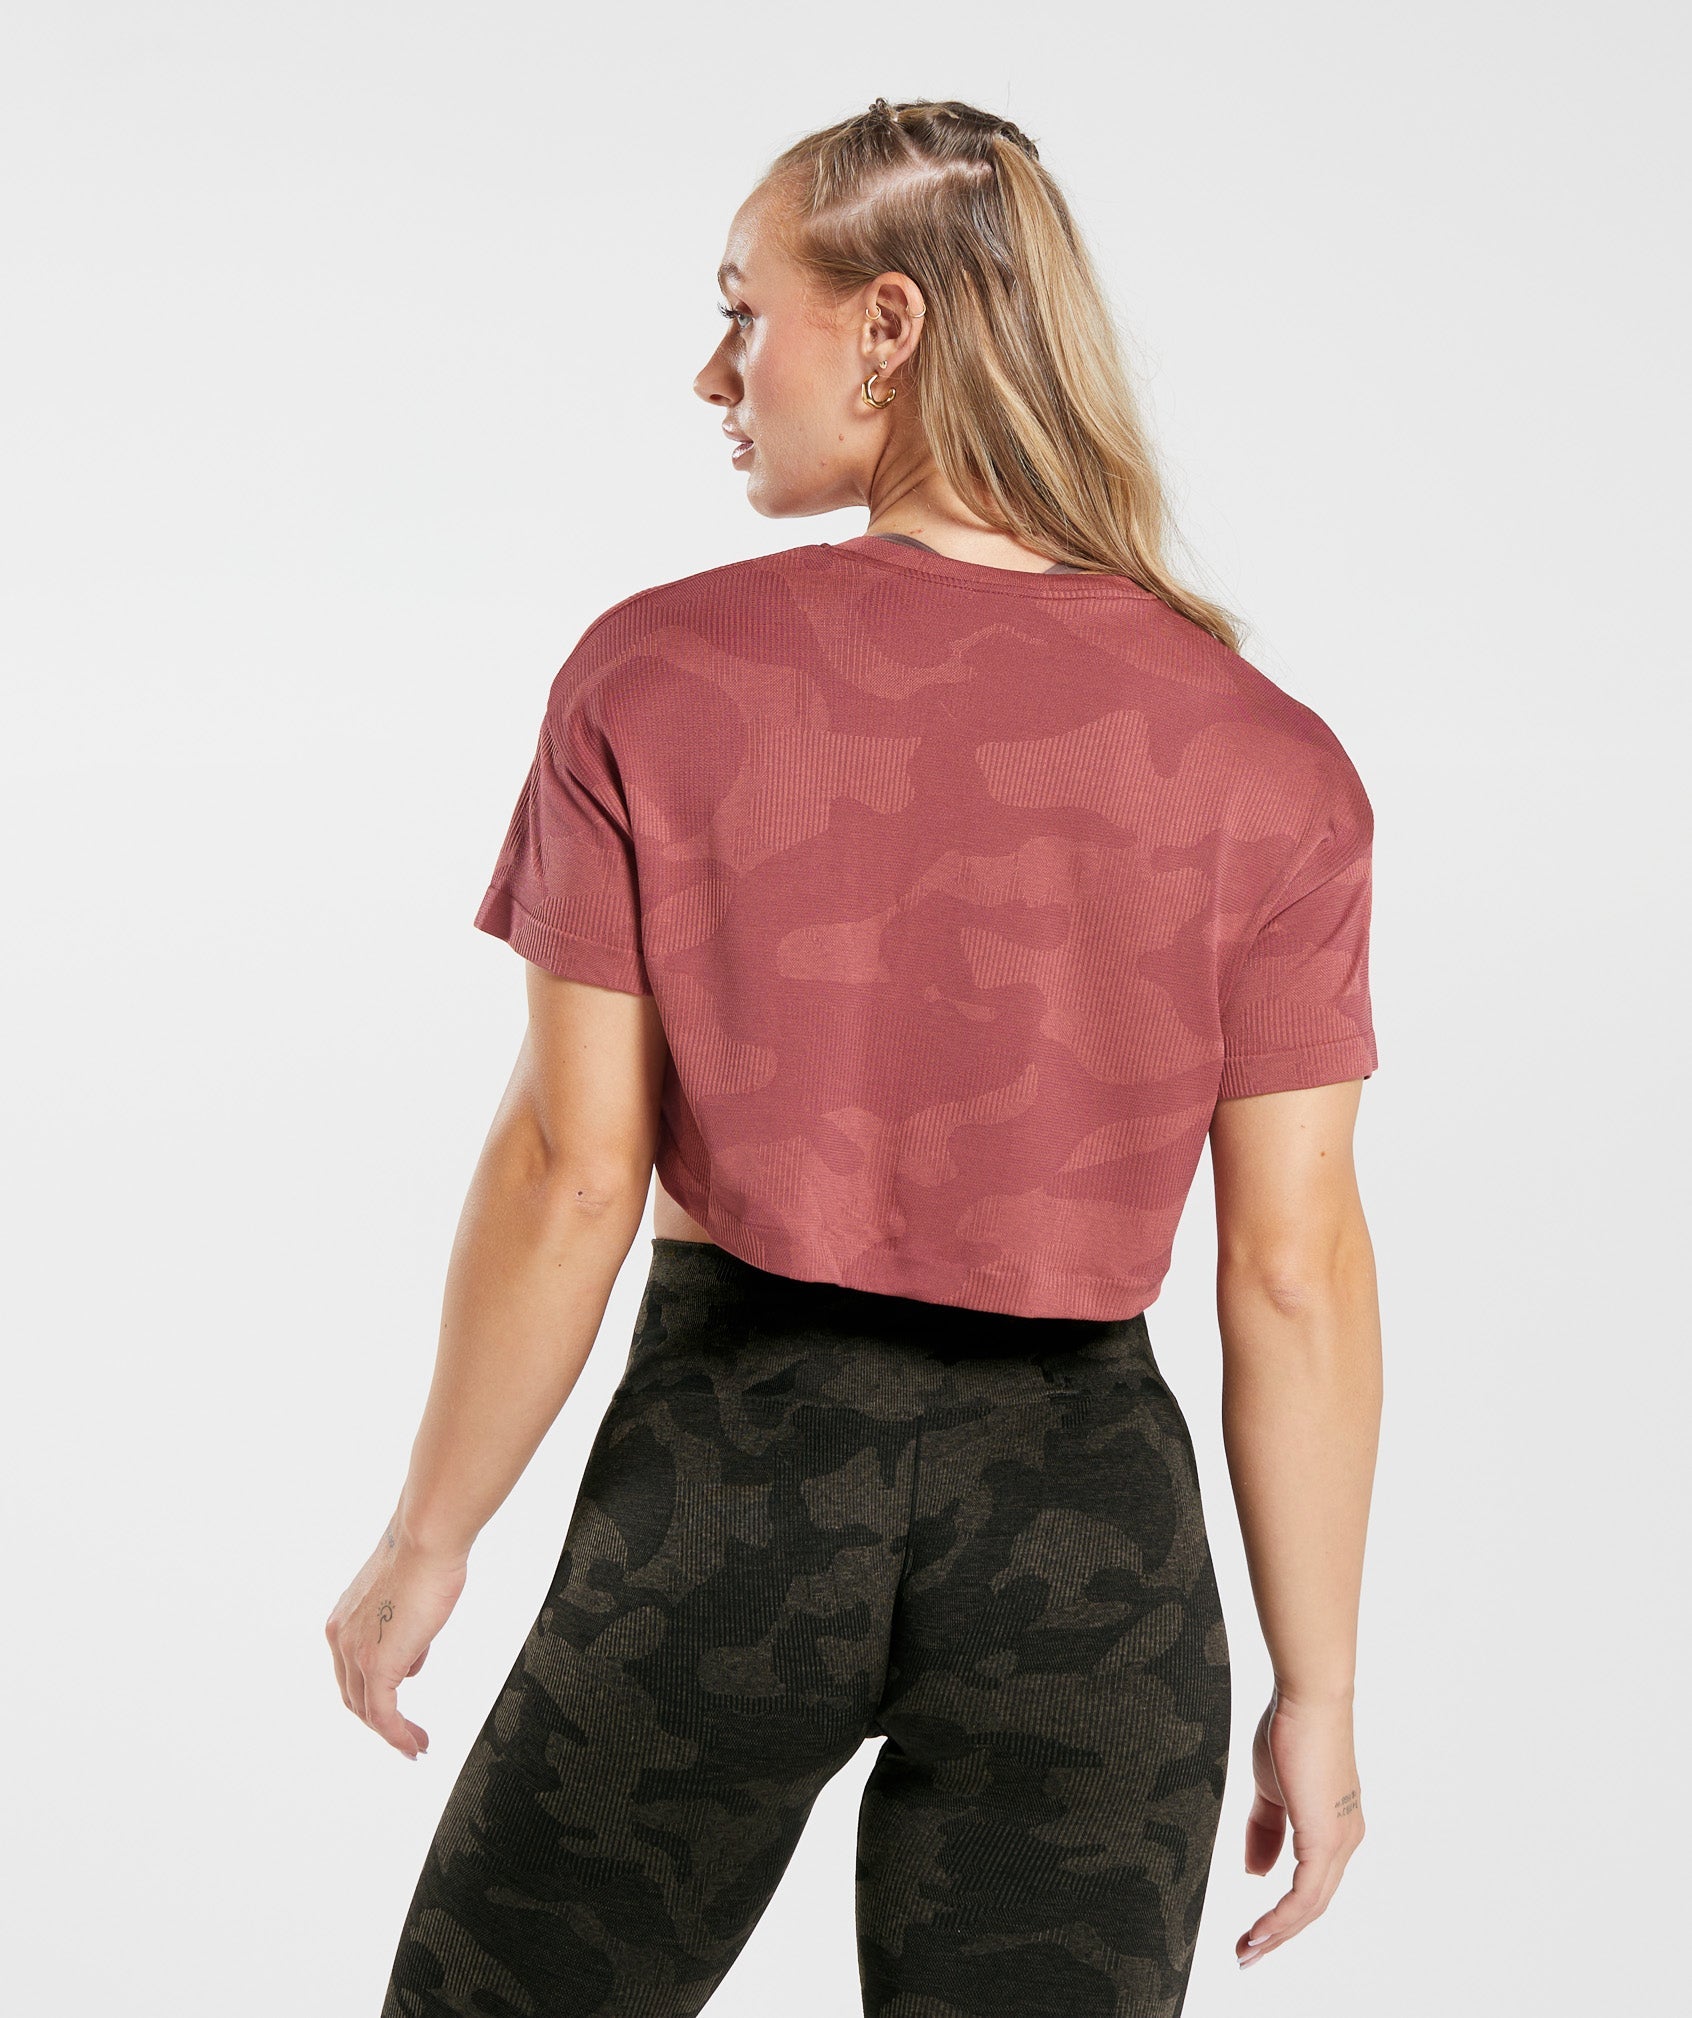 Adapt Camo Seamless Ribbed Crop Top in Soft Berry/Sunbaked Pink - view 3